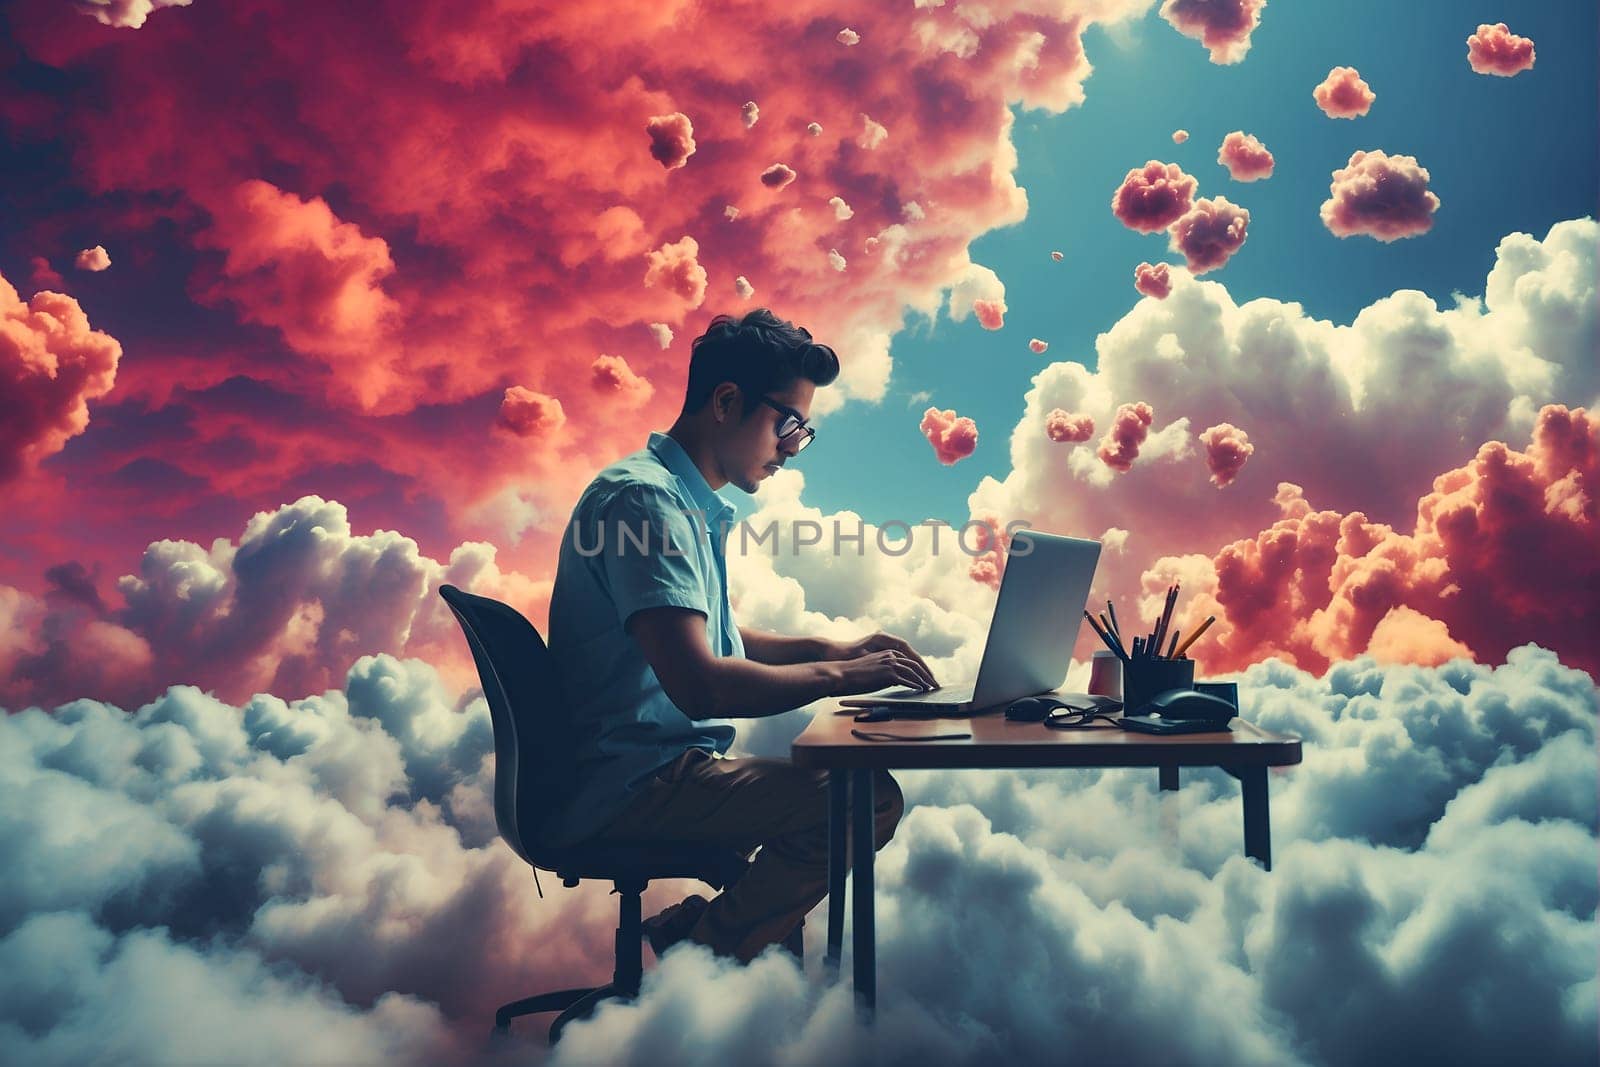 A man is seated at a desk, using a laptop, in an environment surrounded by fluffy clouds.